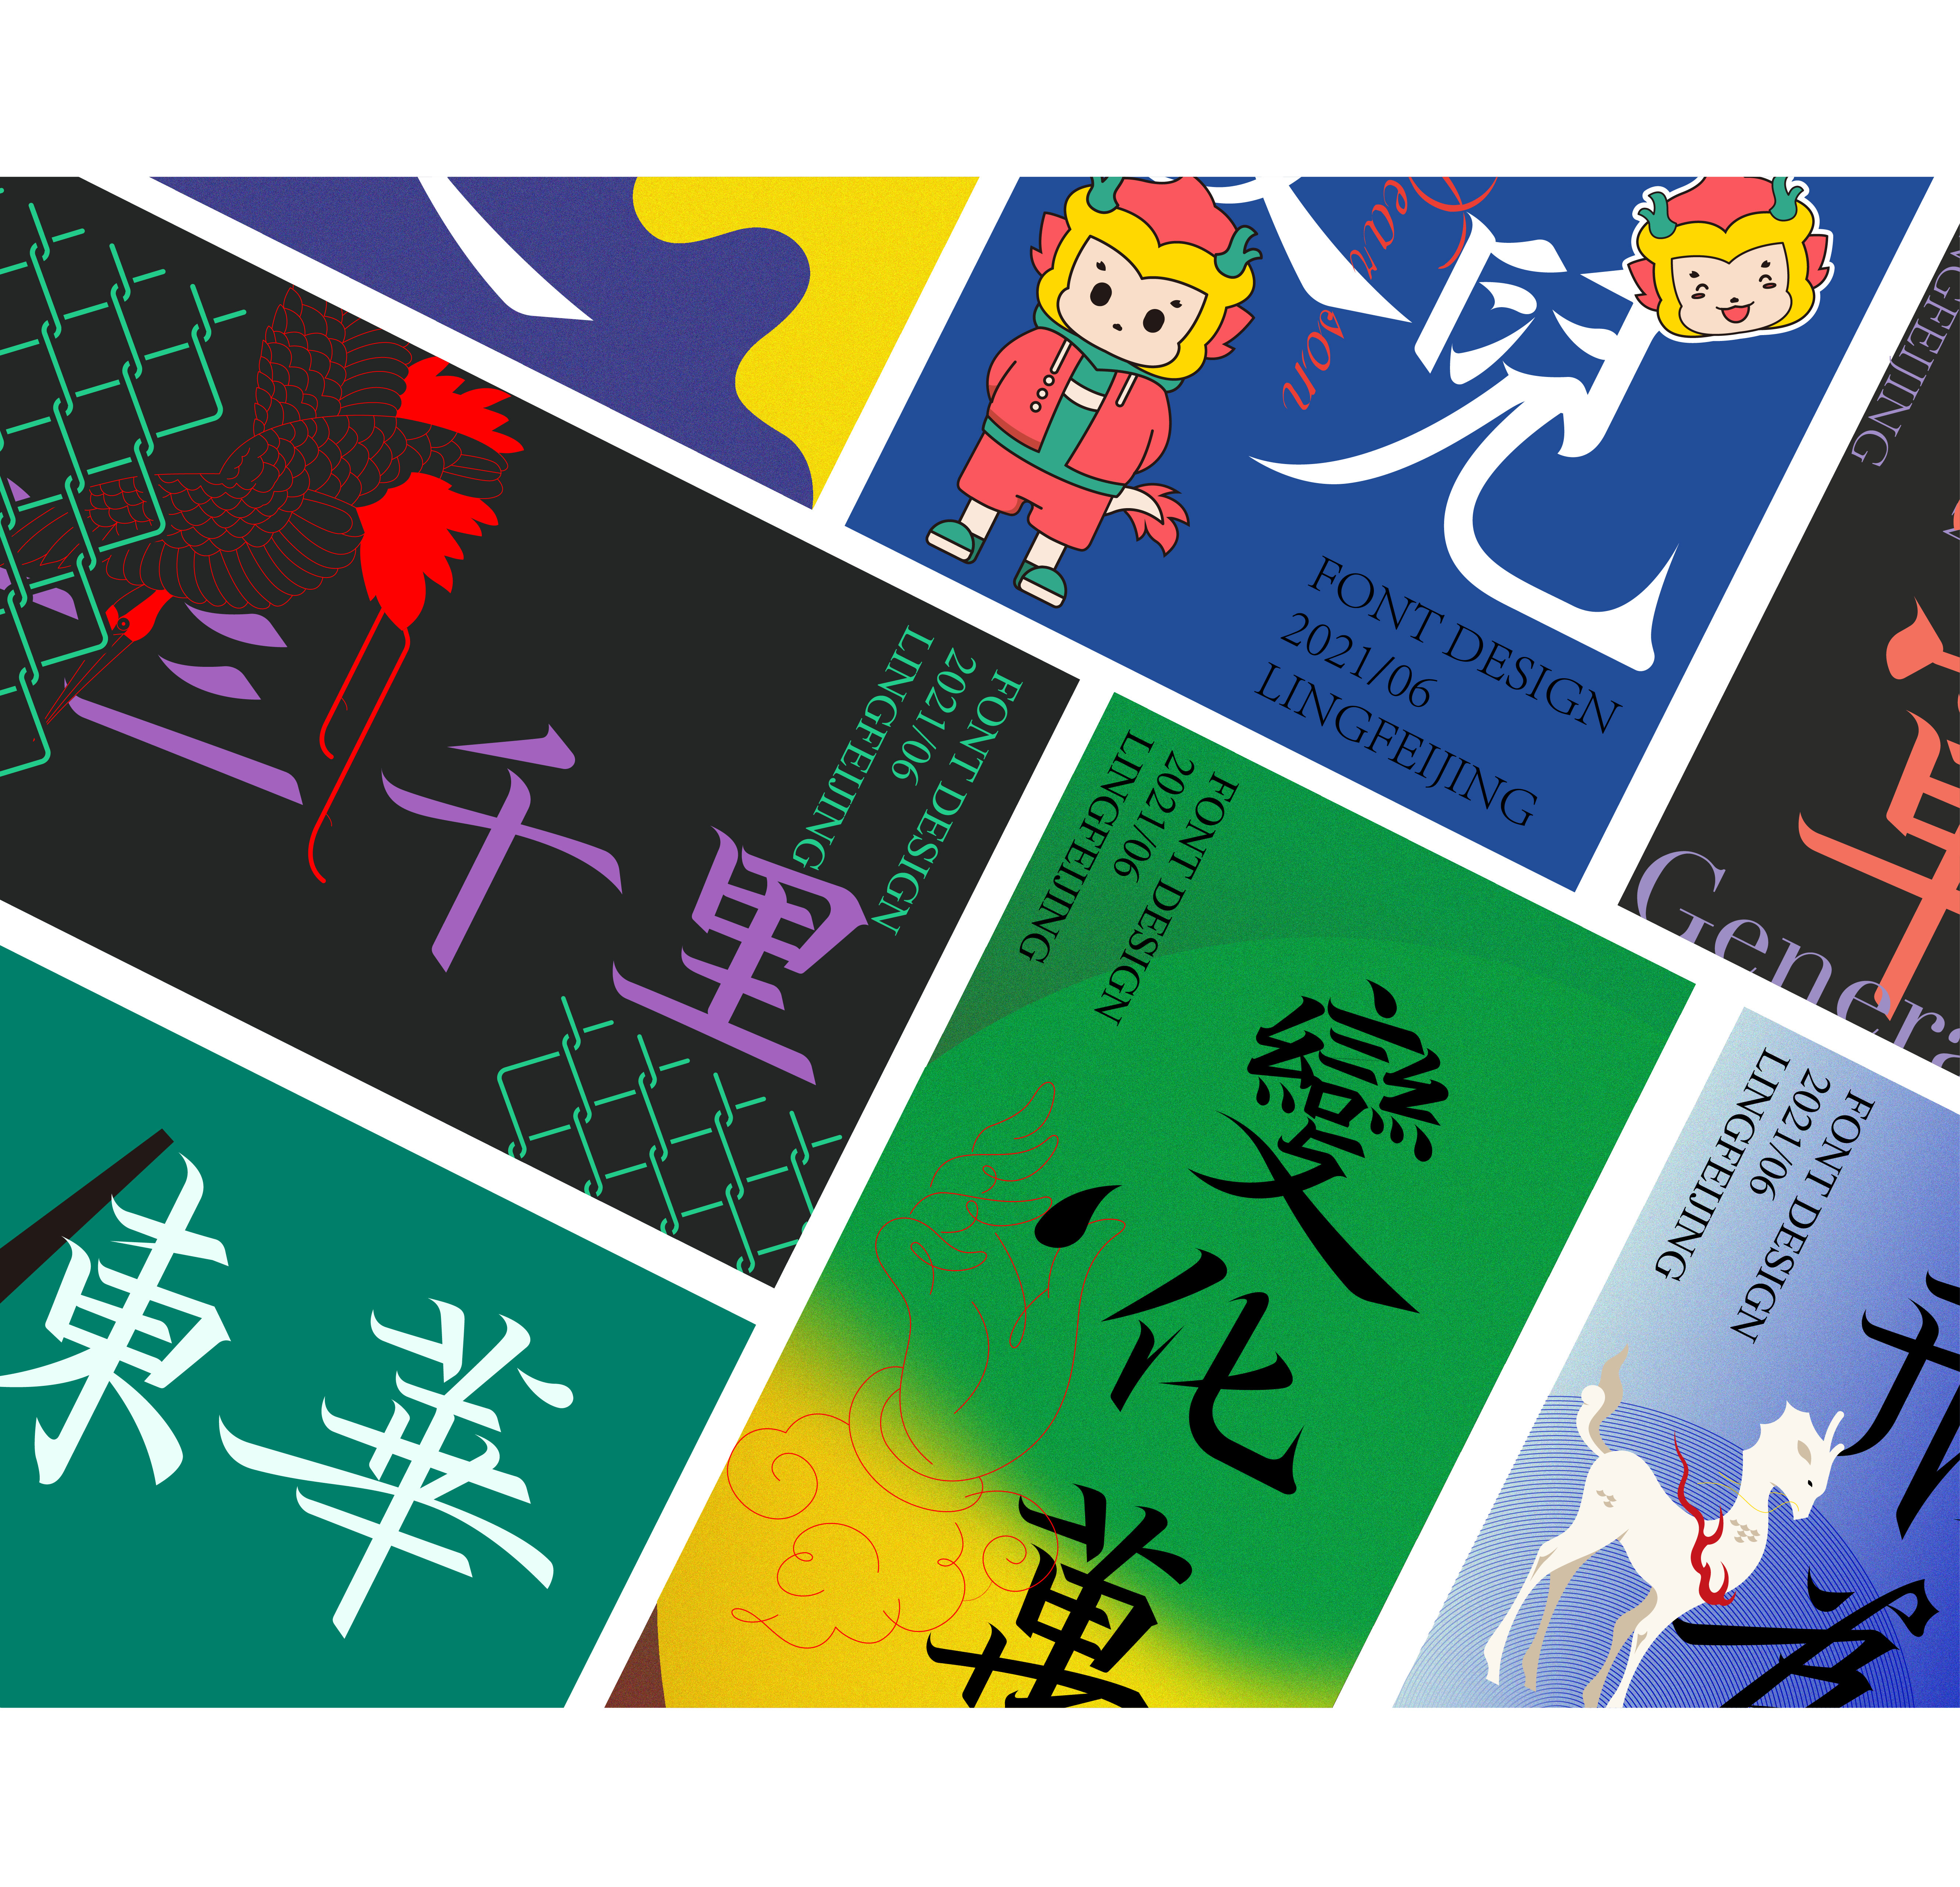 22P Collection of the latest Chinese font design schemes in 2021 #.424